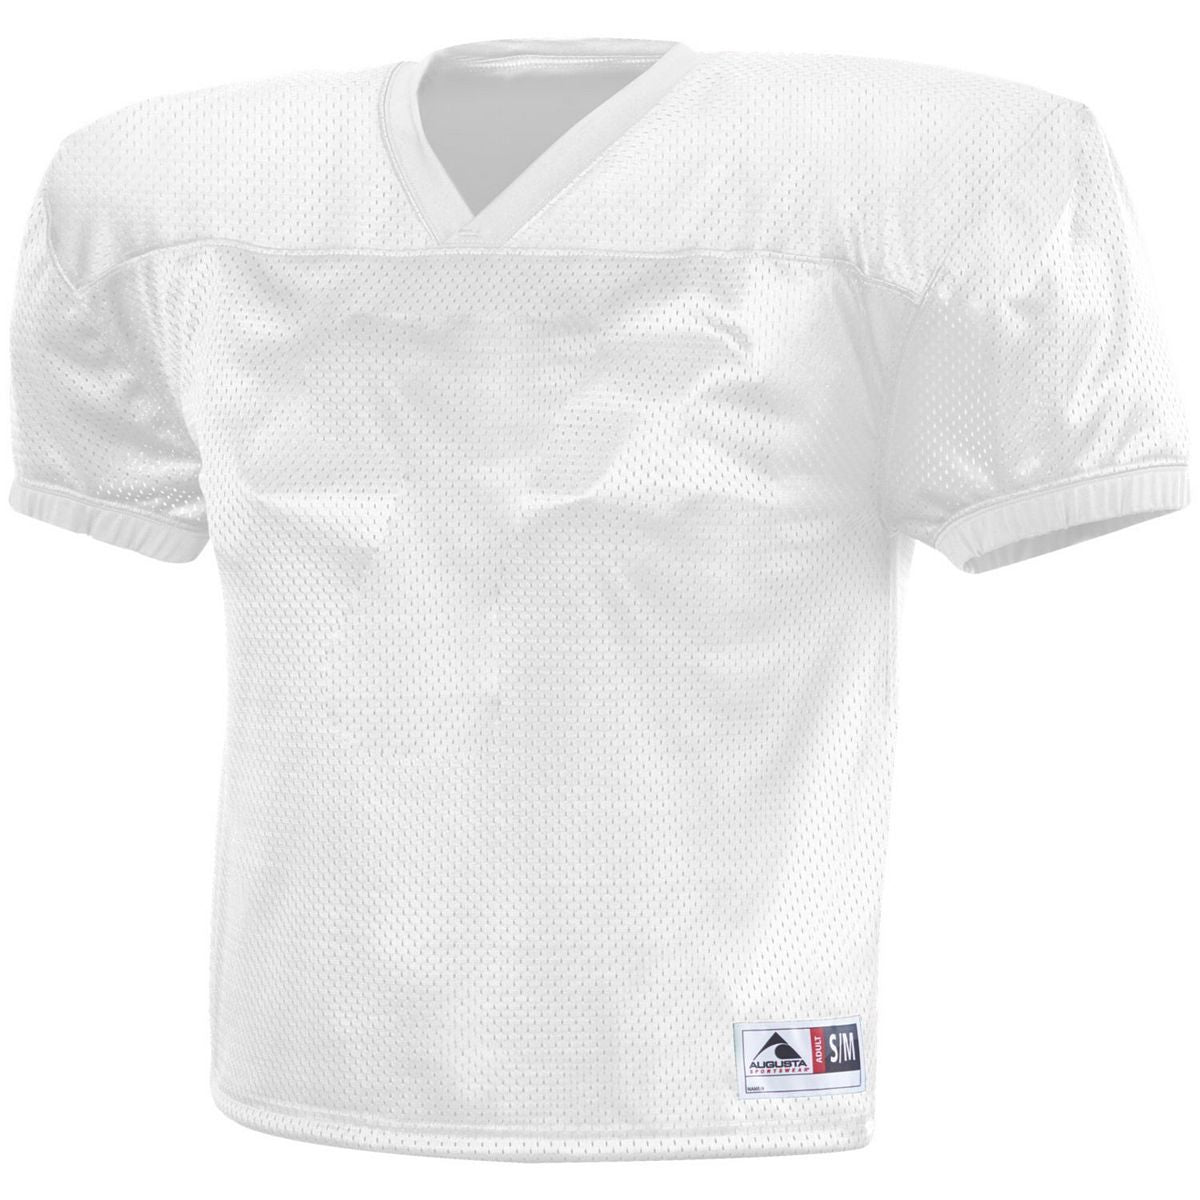 Augusta Sportswear Youth Dash Practice Jersey in White  -Part of the Youth, Youth-Jersey, Augusta-Products, Football, Shirts, All-Sports, All-Sports-1 product lines at KanaleyCreations.com